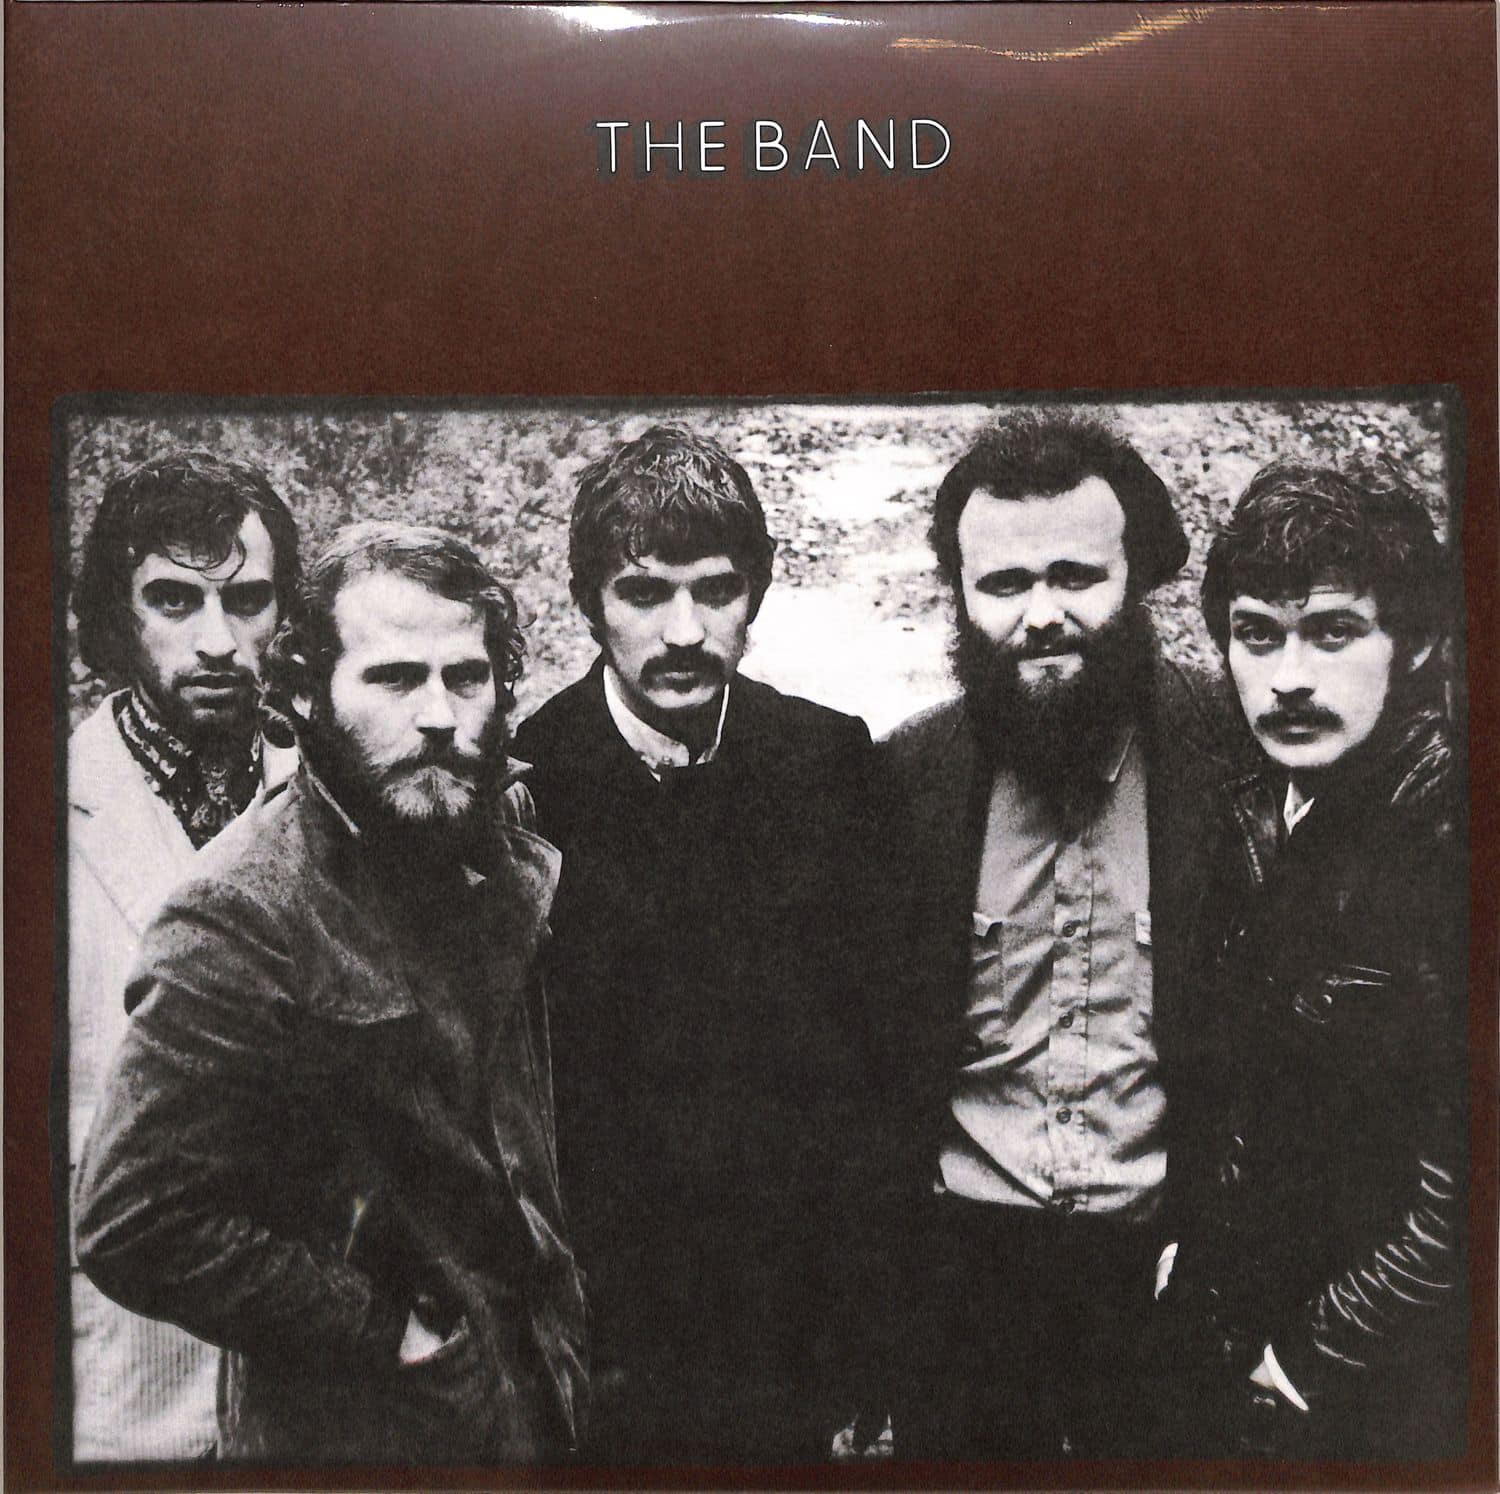 The Band - THE BAND 